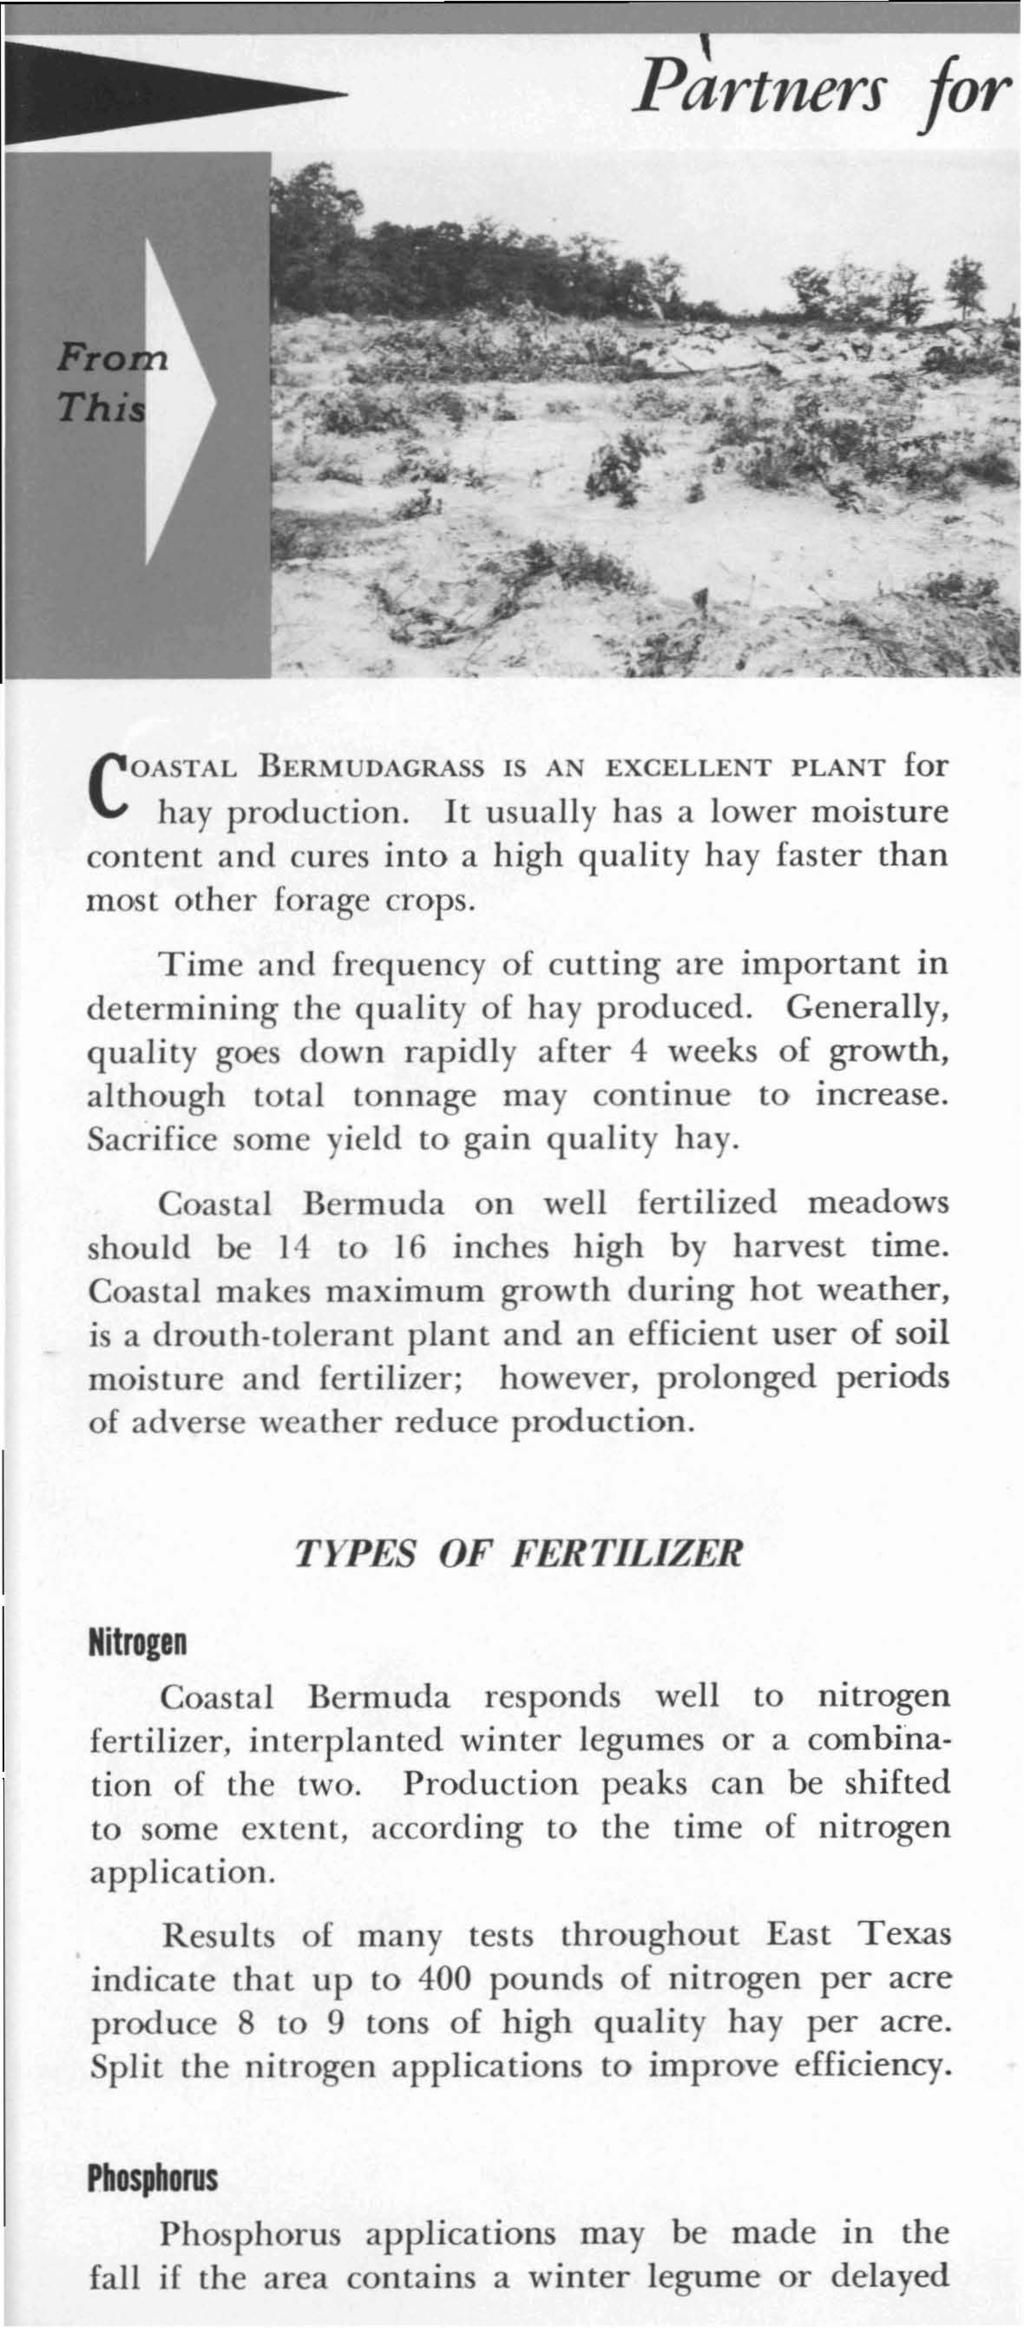 Partners for COASTAL BERMUDAGRASS IS AN EXCELLENT PLANT for hay production. It usually has a lower moisture content and cures into a high quality hay faster than most other forage crops.